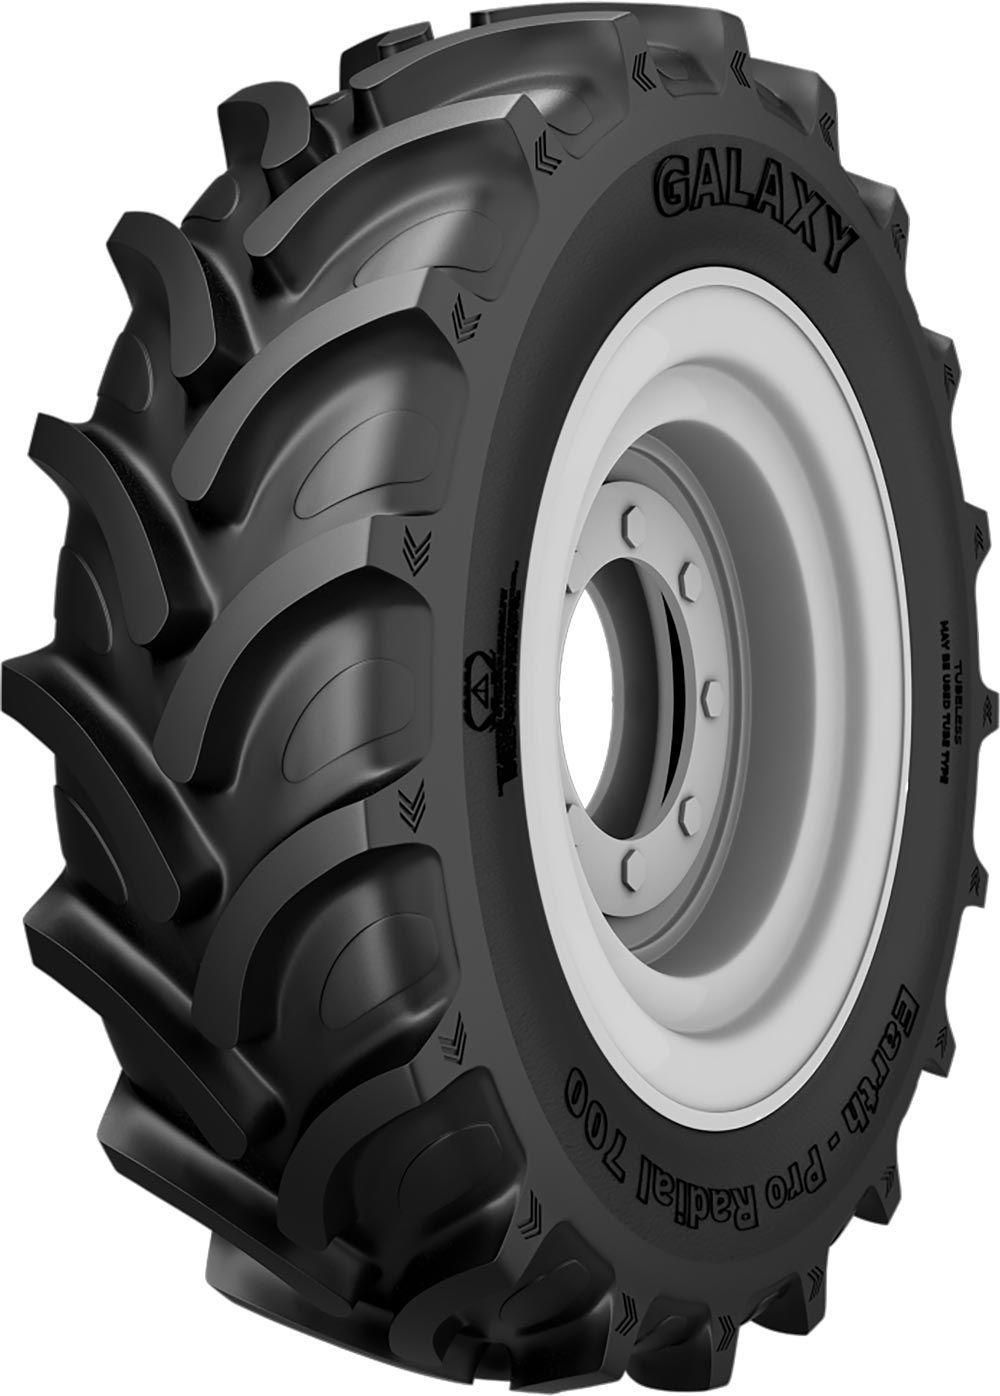 product_type-industrial_tires Galaxy Earth-Pro 700 R-1W TL 580/70 R38 A